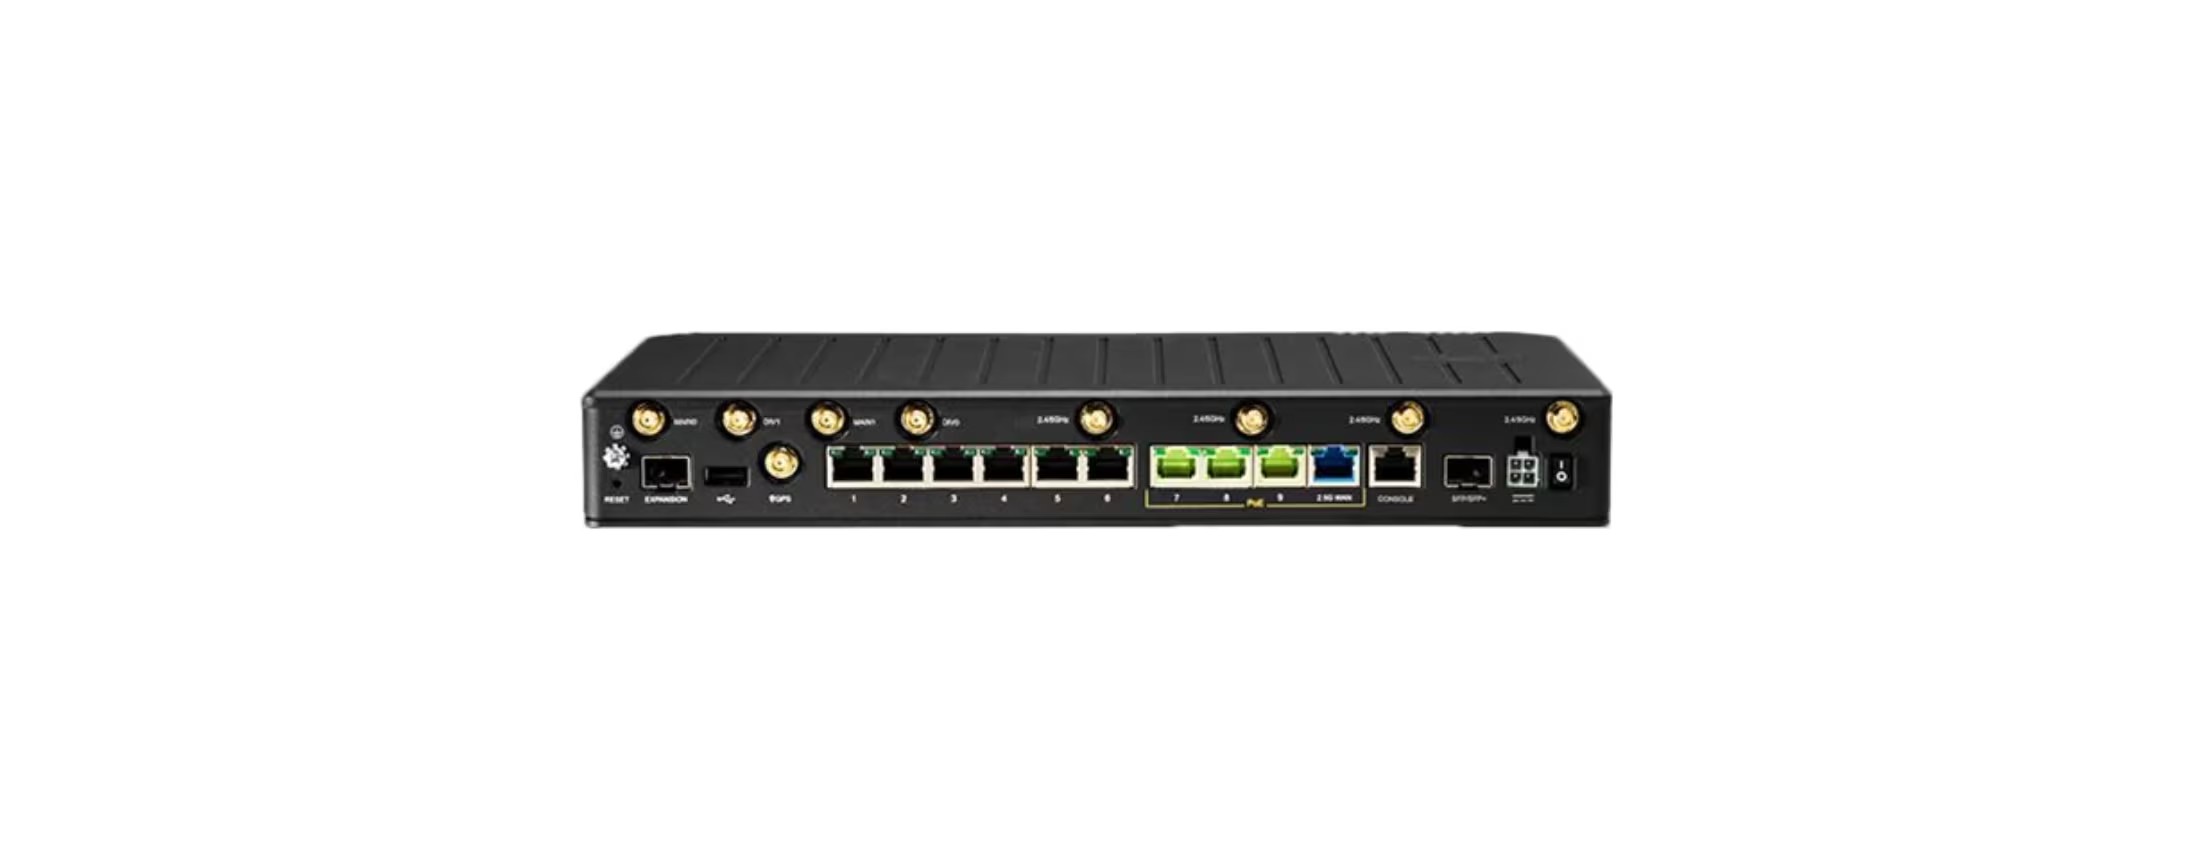 Cradlepoint E3000-C18B Enterprise Router With WiFi BF05-3000C18B-GN